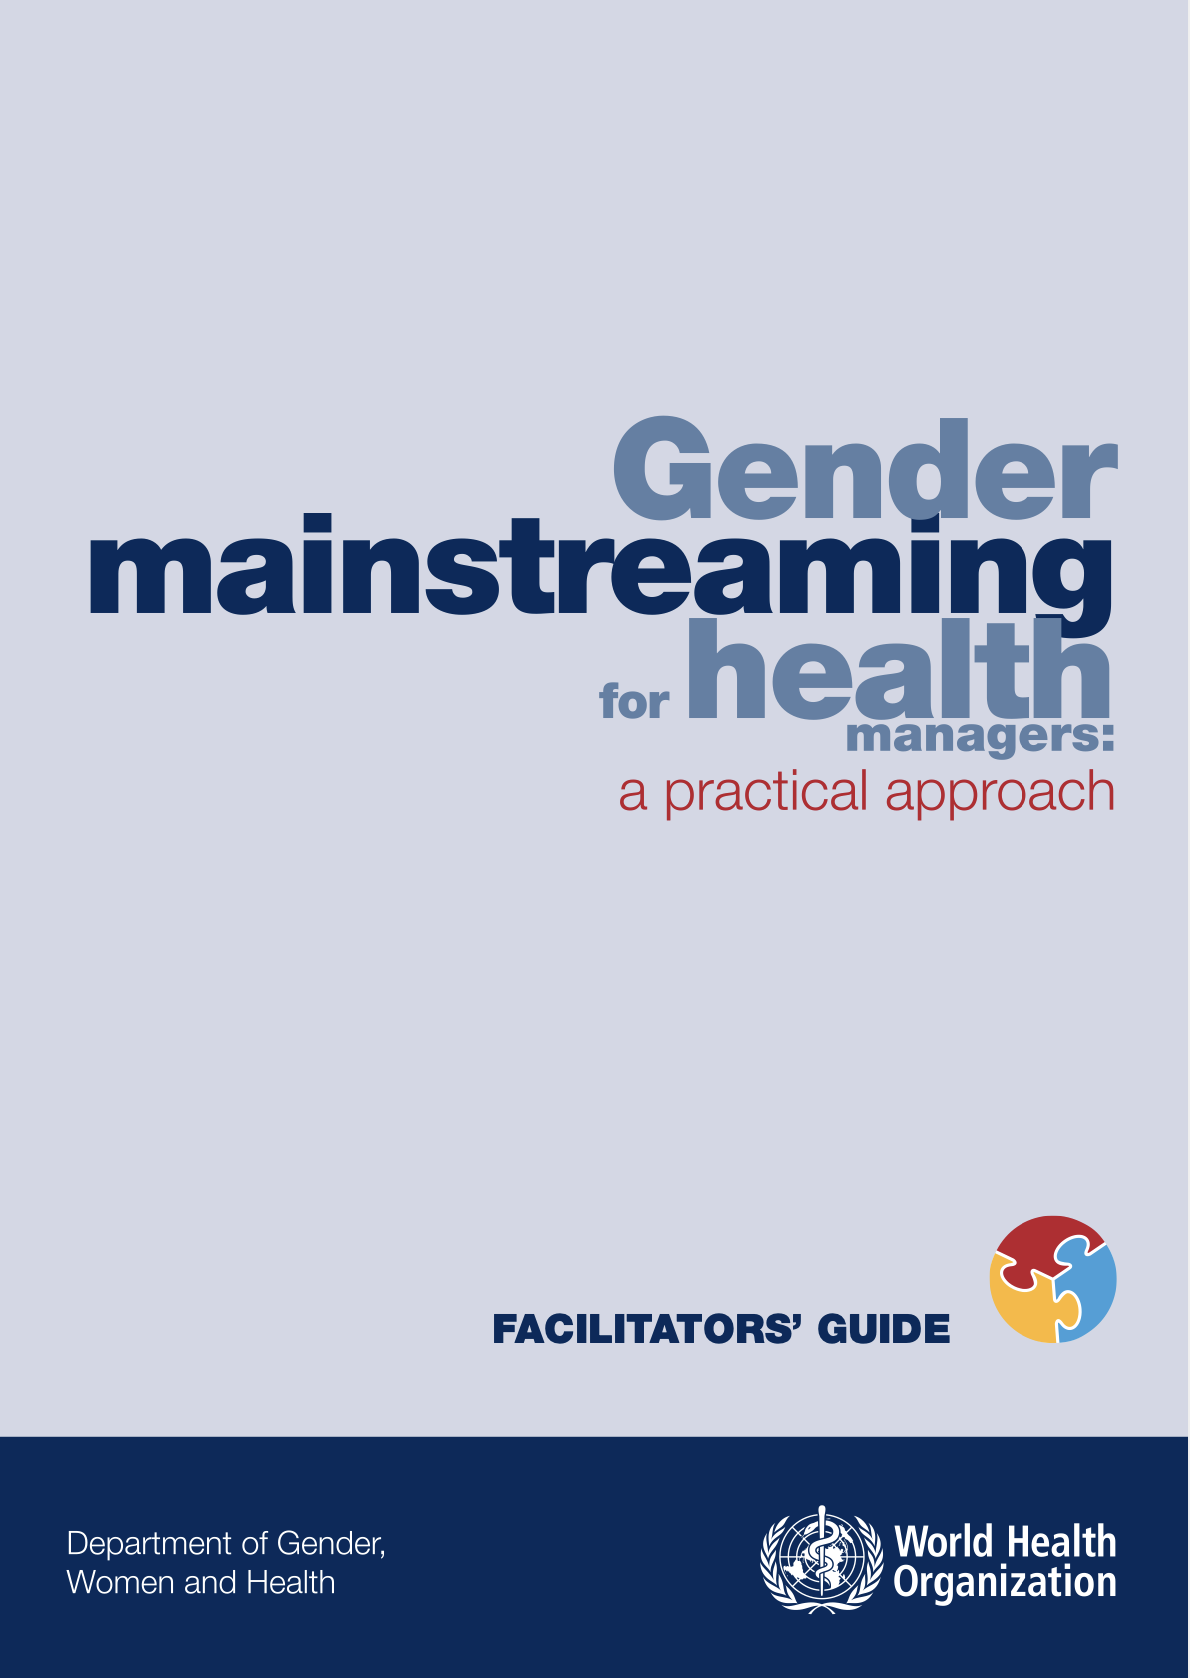 Gender mainstreaming for health managers: A practical approach